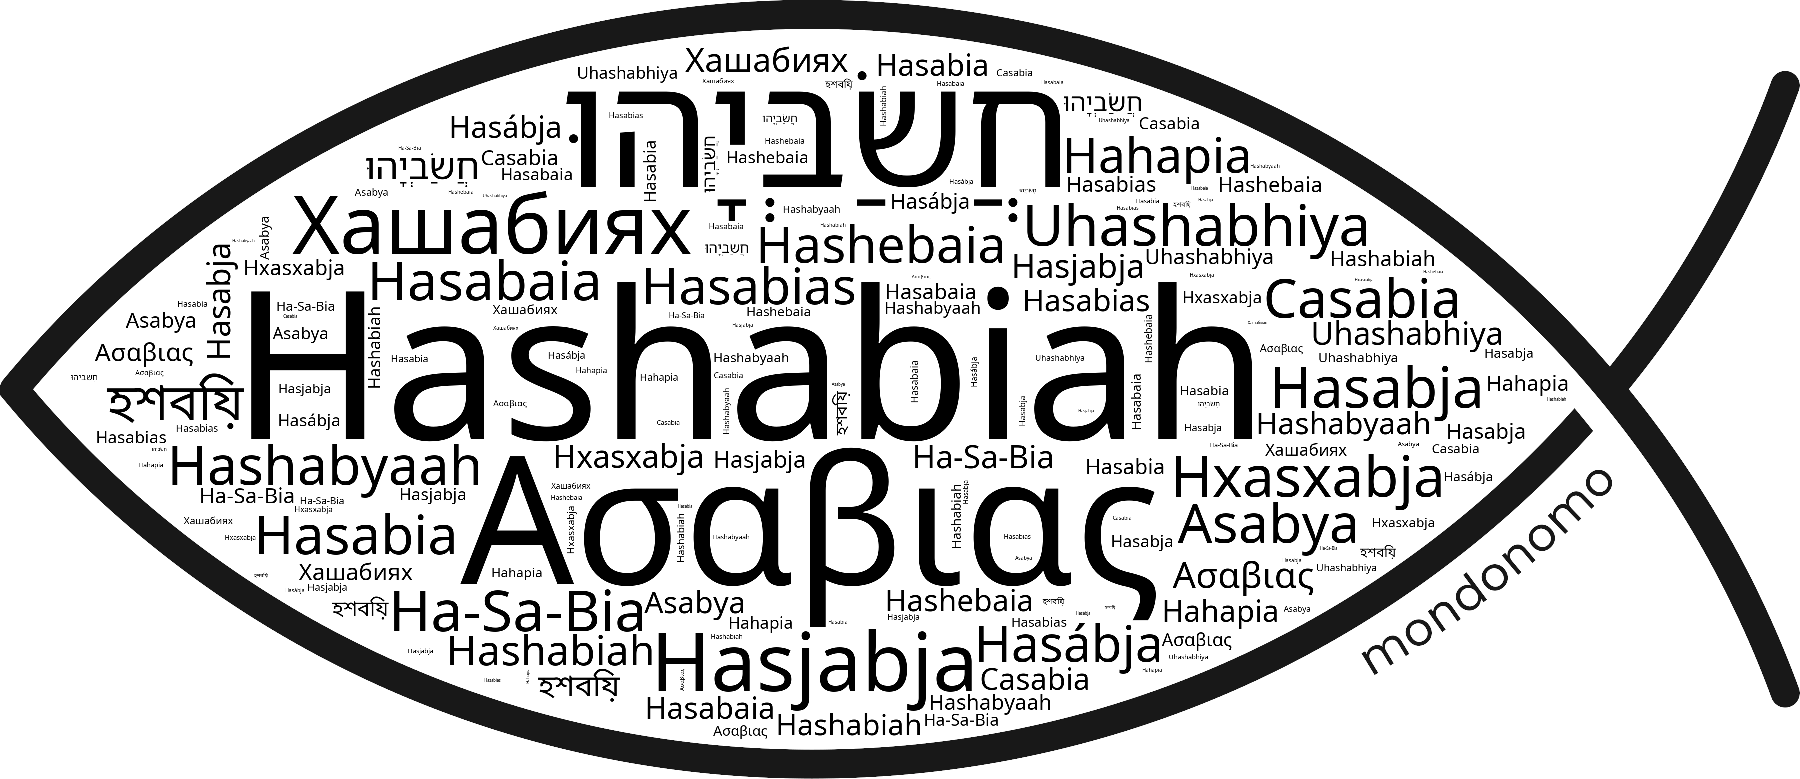 Name Hashabiah in the world's Bibles